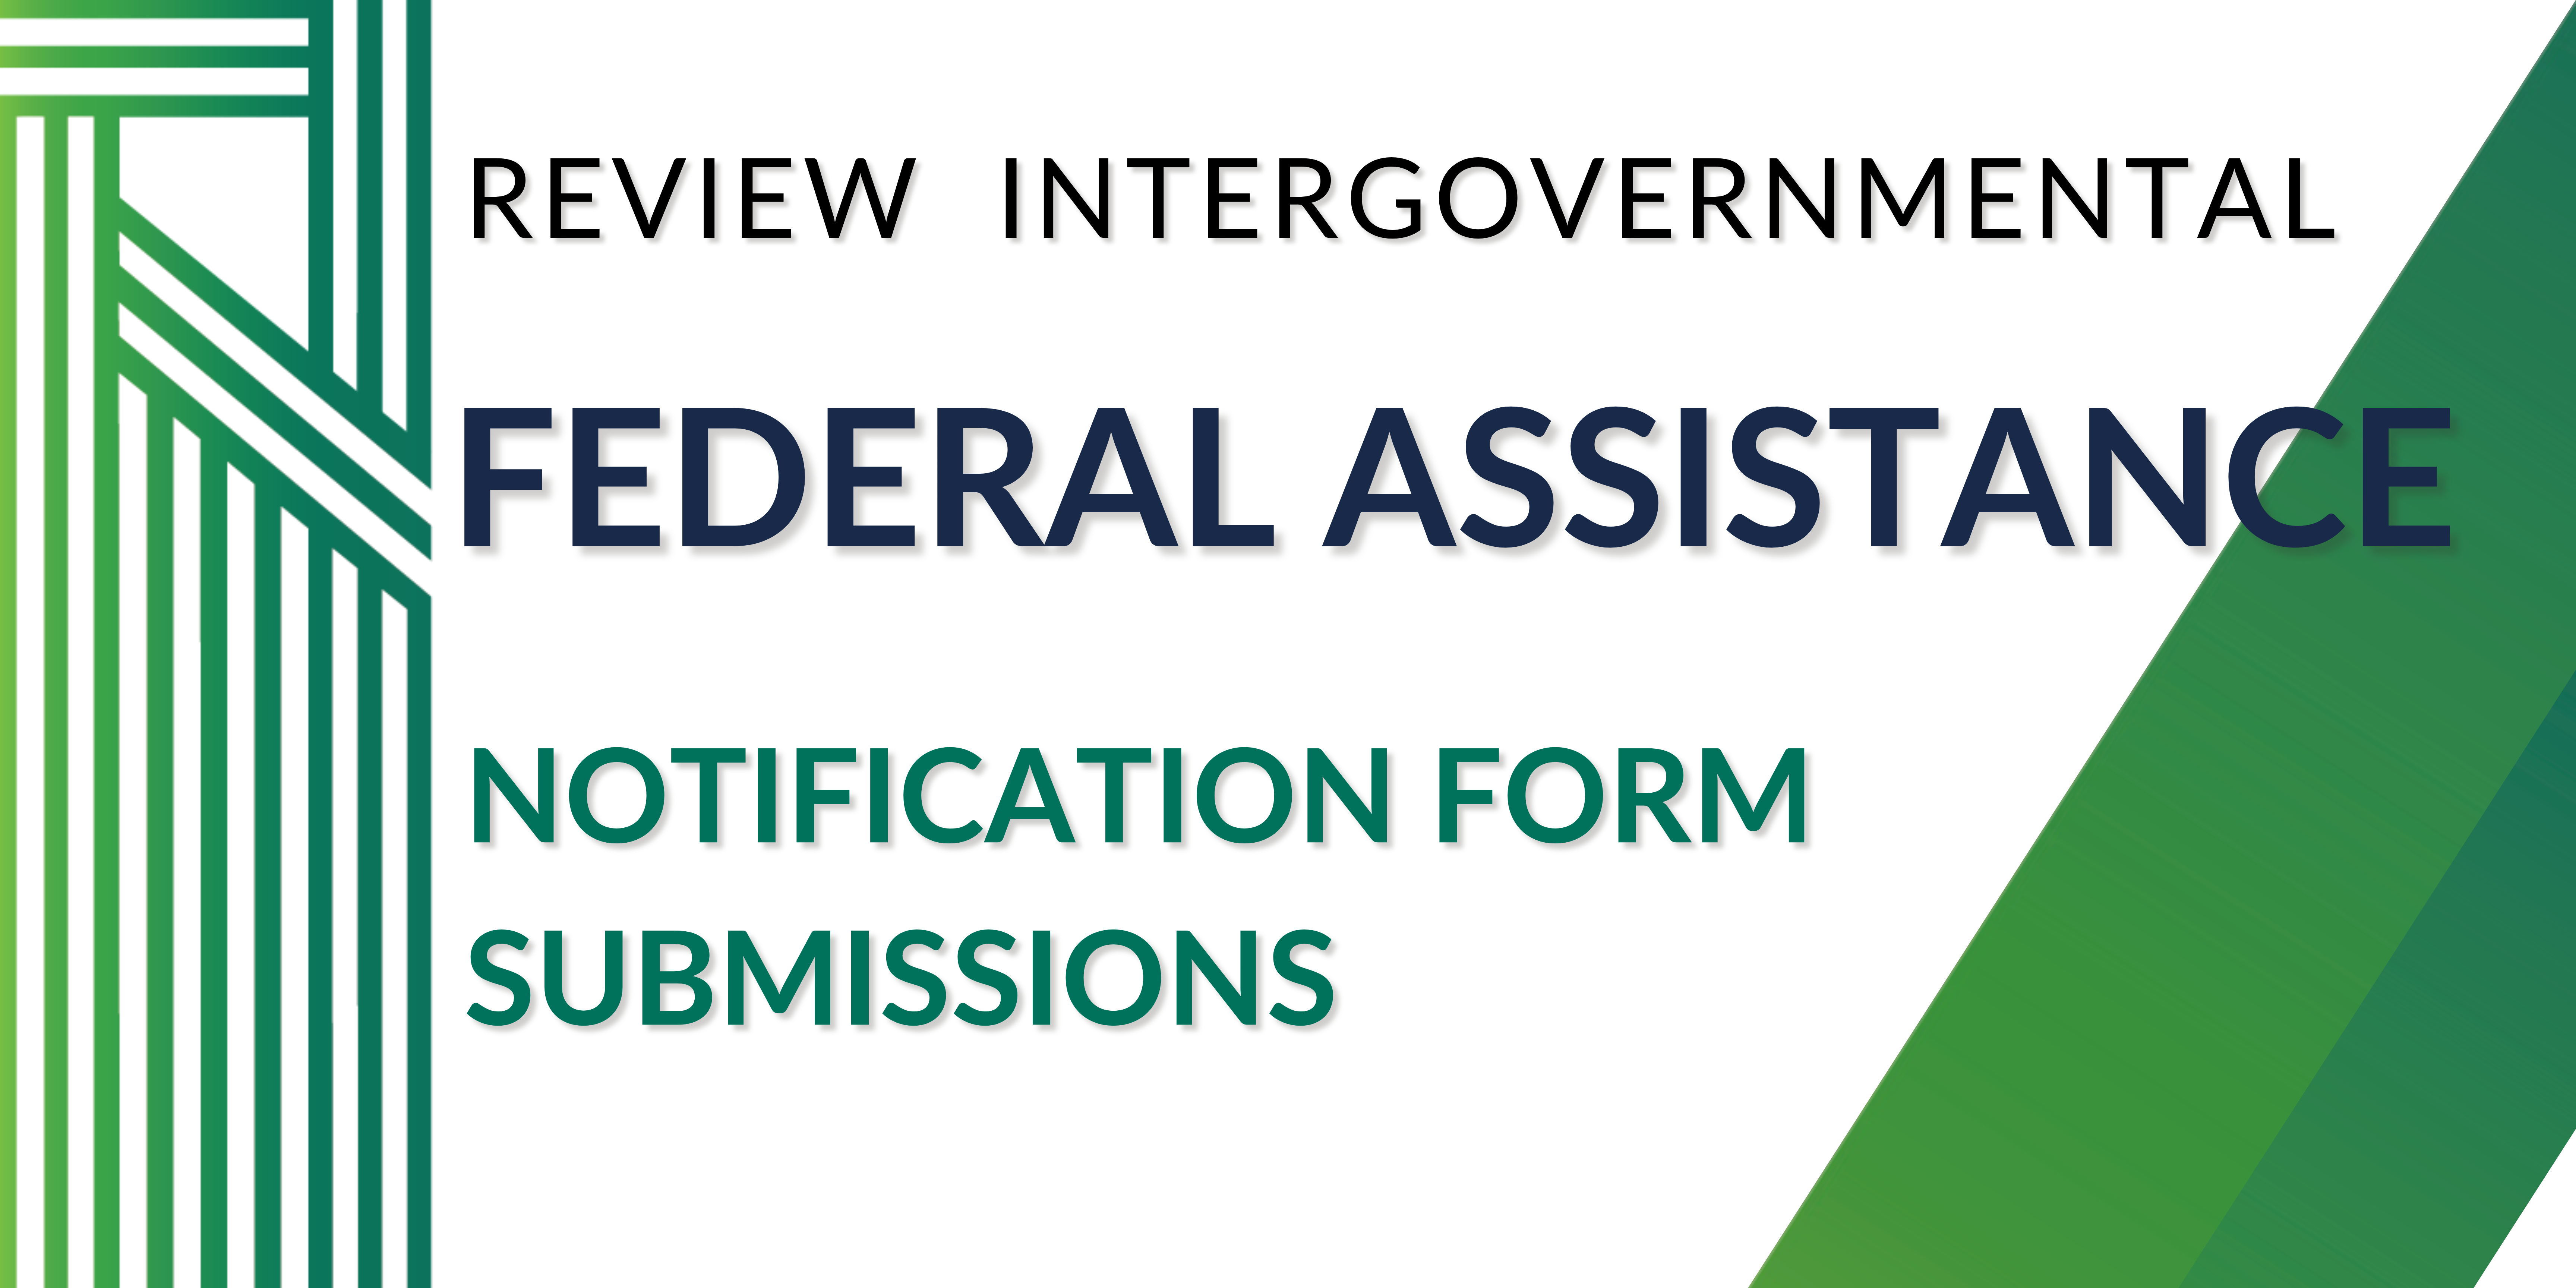 View Intergovernmental Federal Assistance Notification Form Submissions